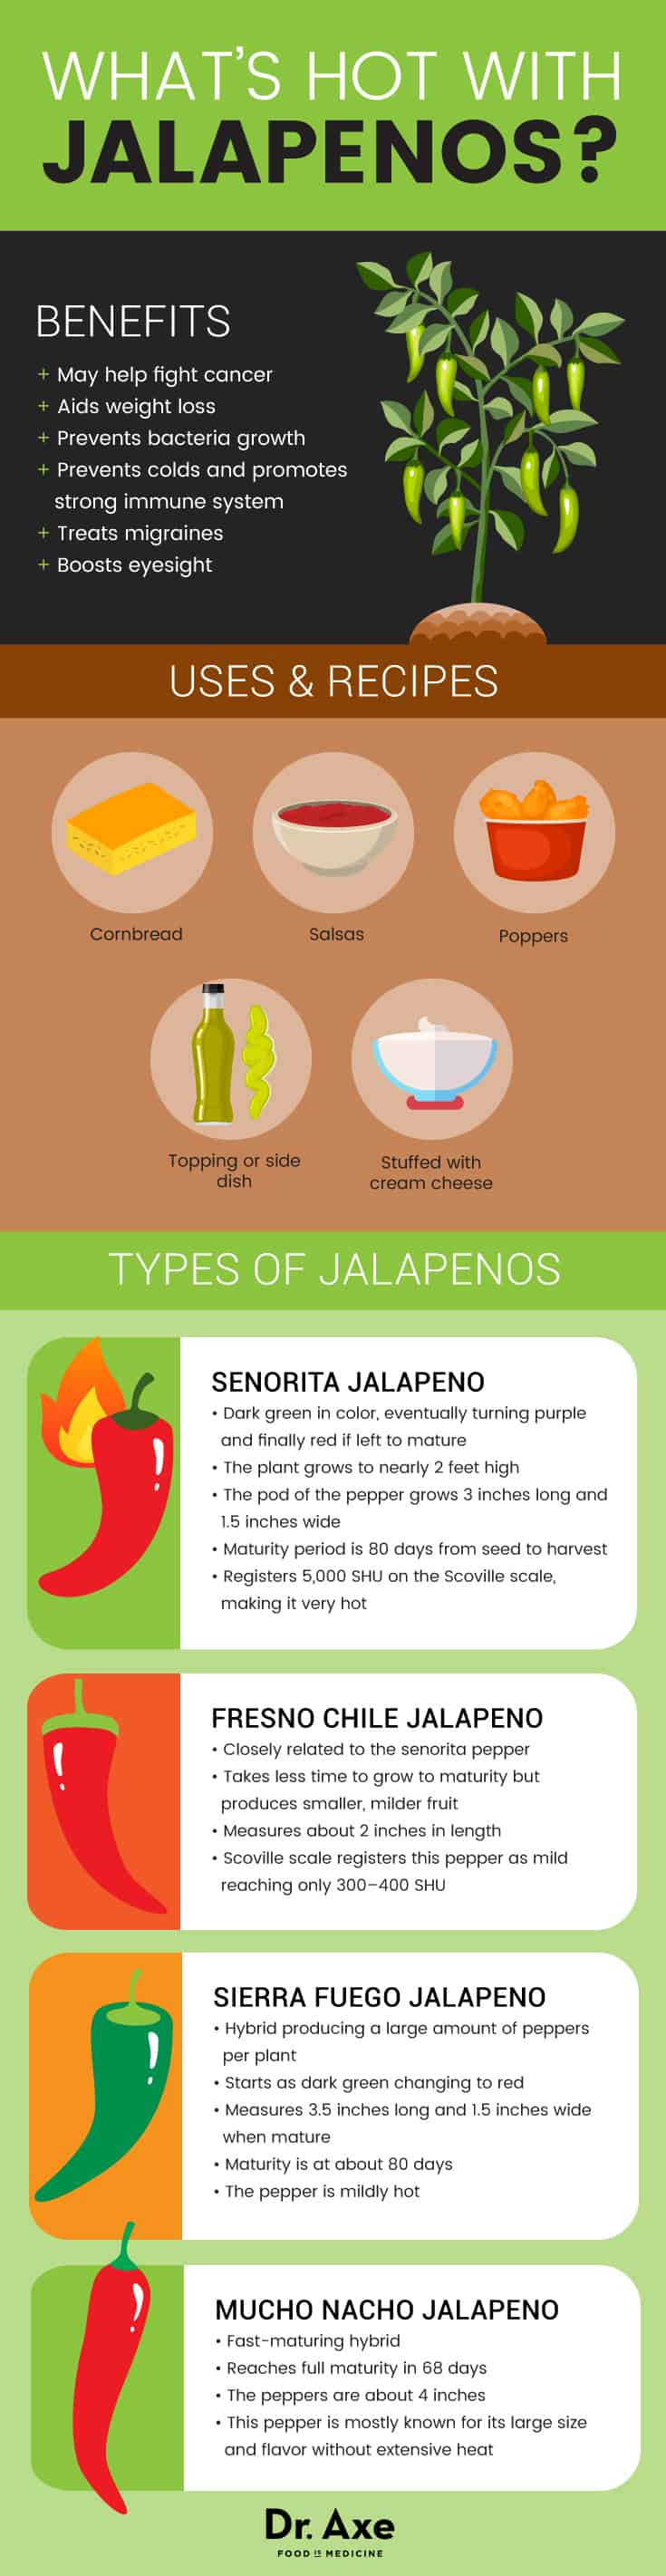 What's hot with jalapenos - Dr. Axe